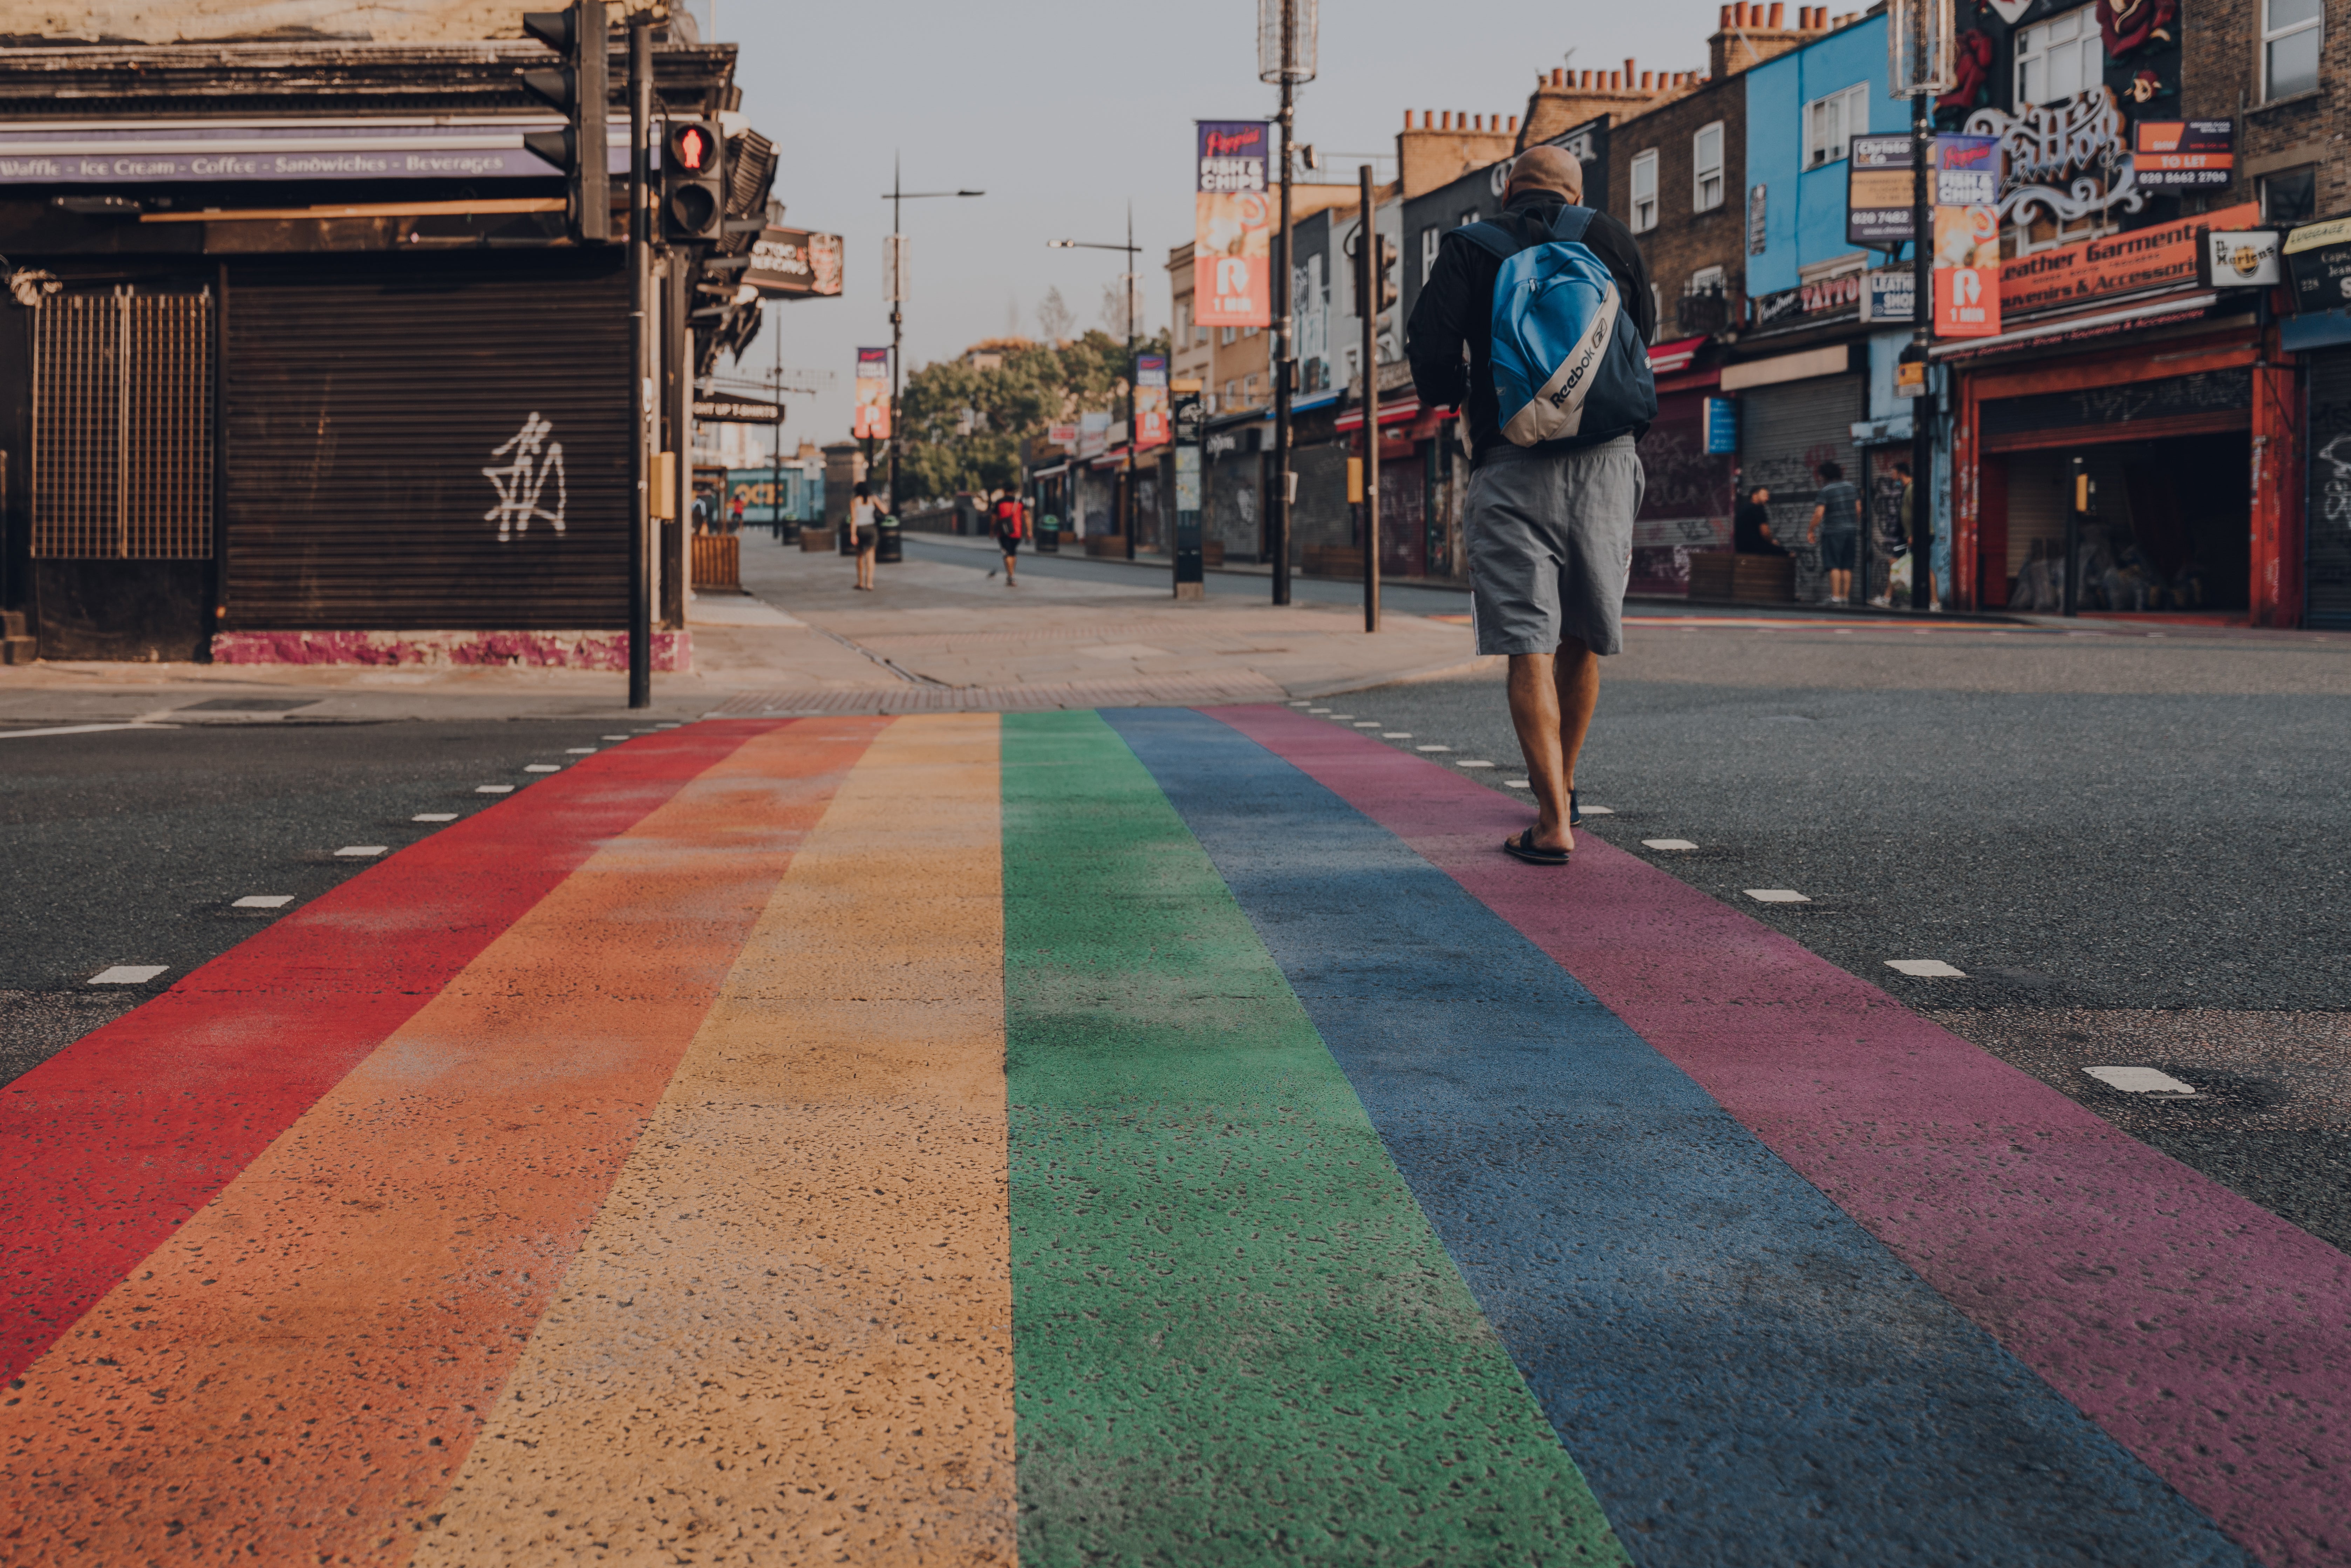 Designed to celebrate the LGBT+ community, it’s now being used to commodify the movement